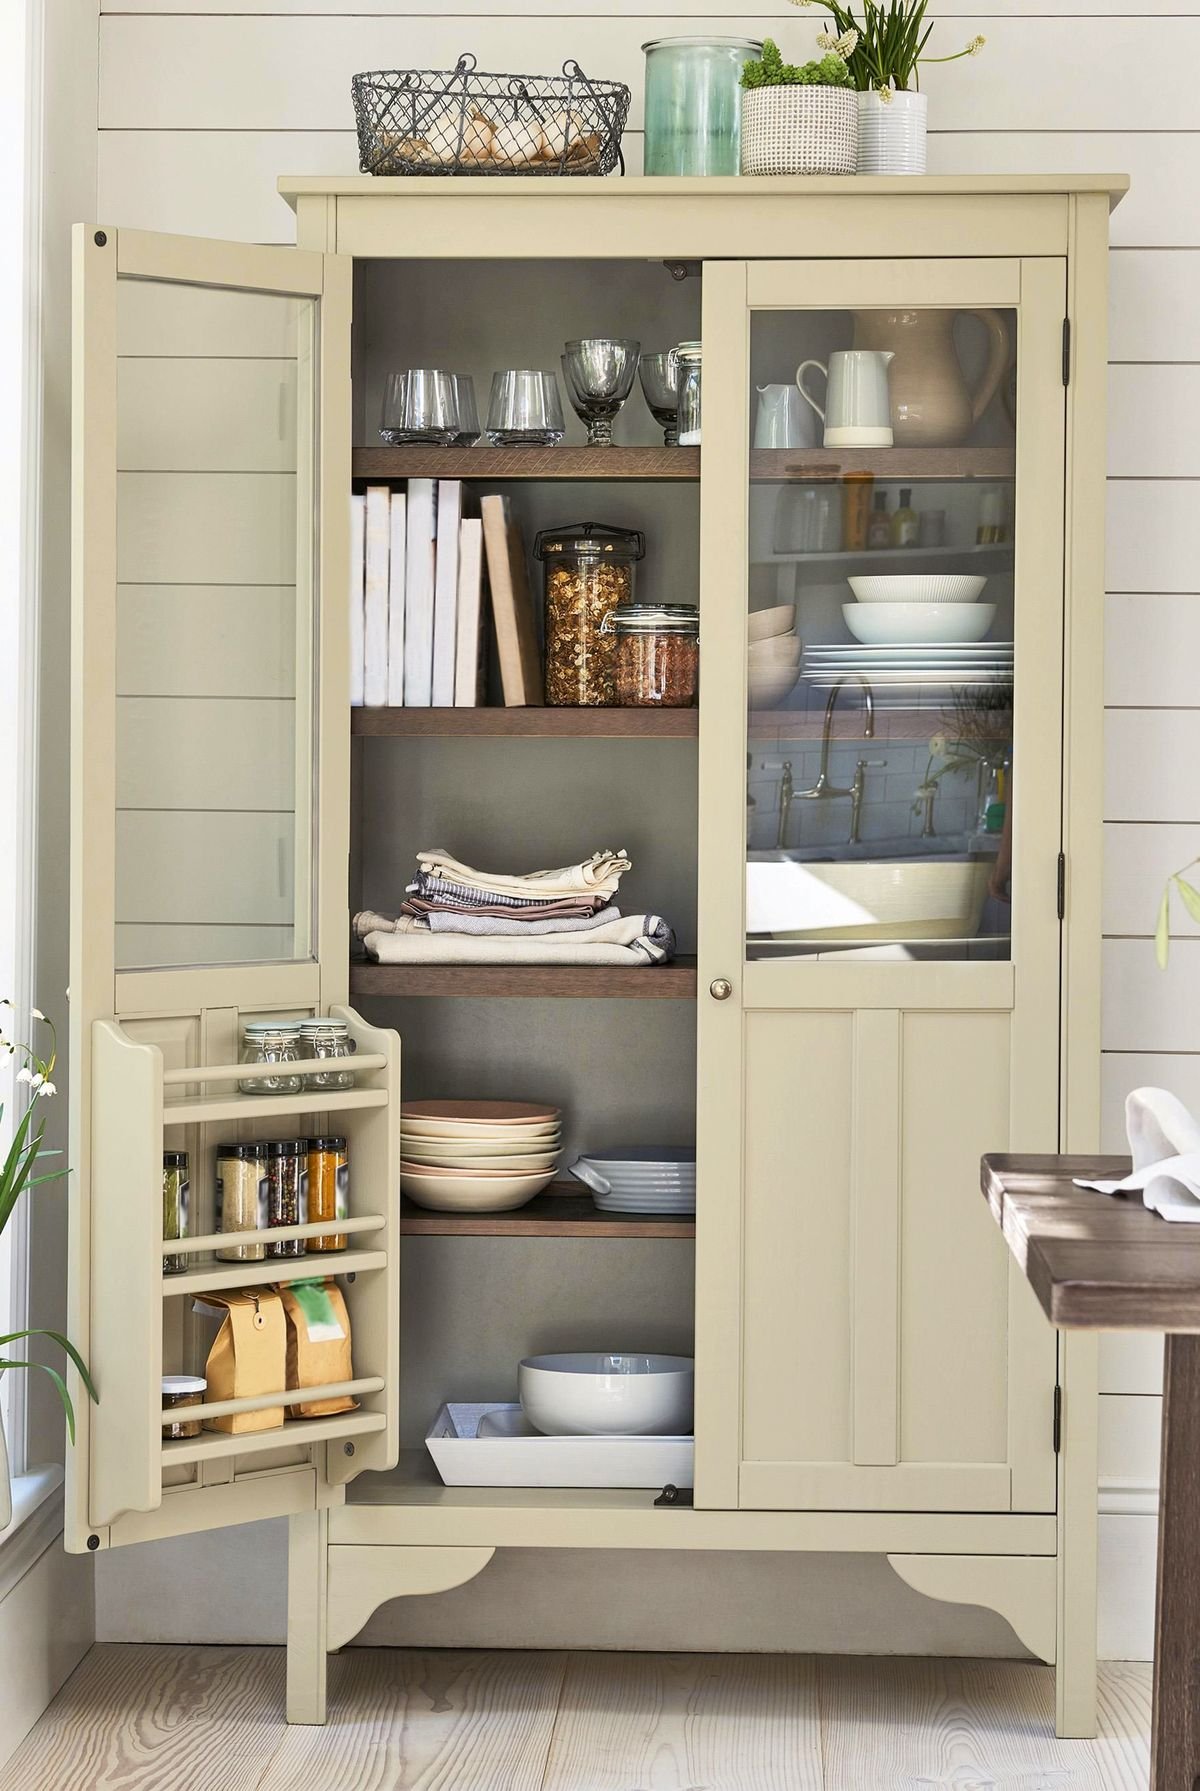 22 organization ideas for the home, from the experts